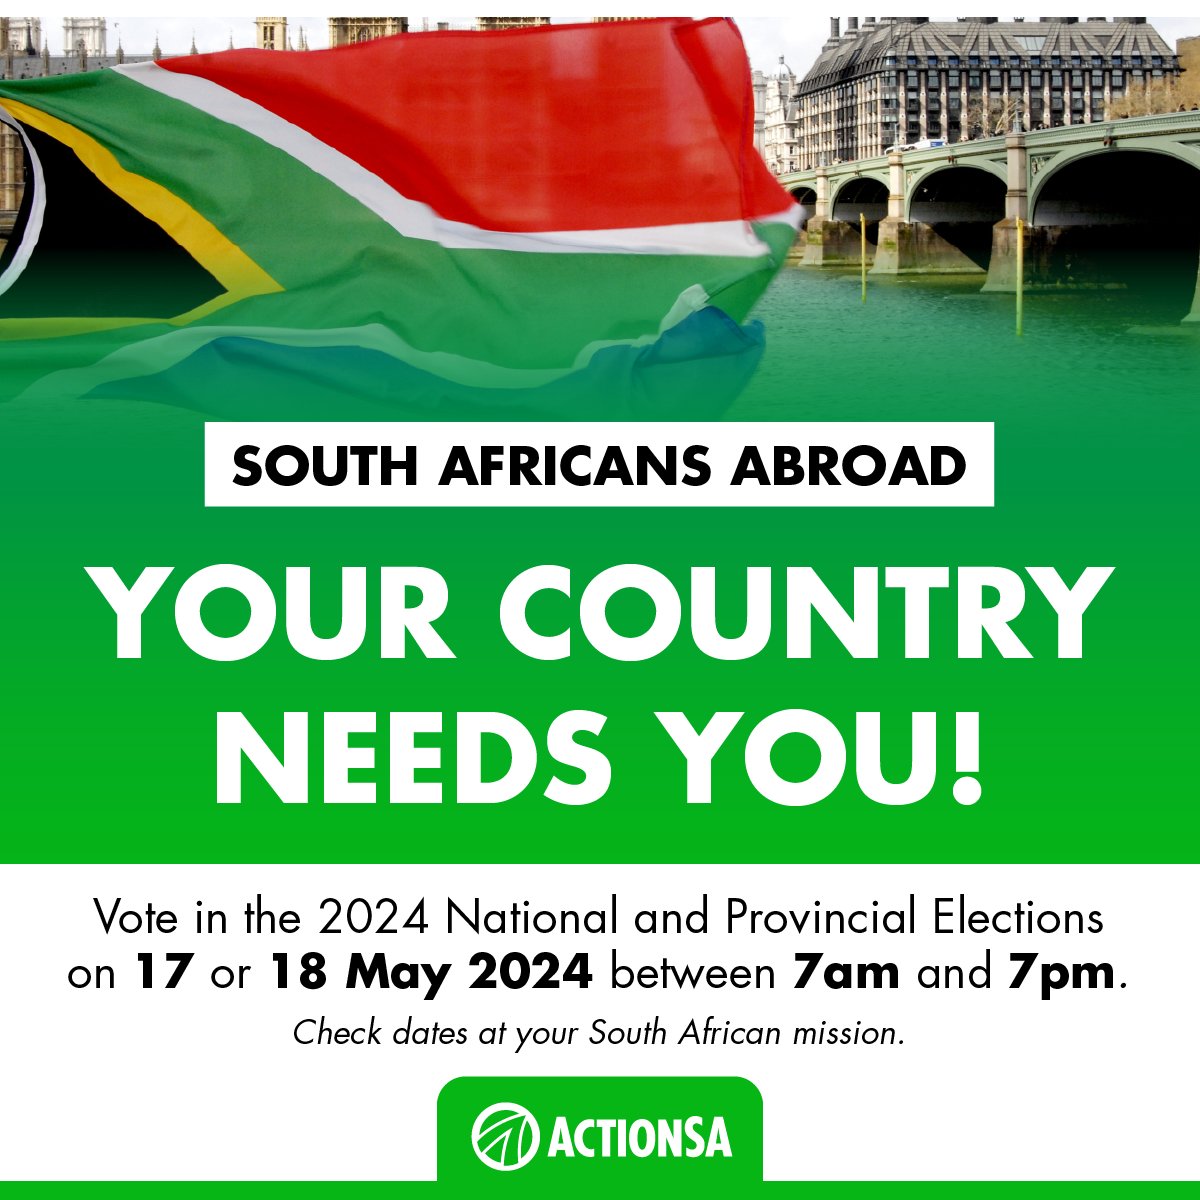 📣 South African citizens abroad, your country needs you! 🇿🇦 Vote in the 2024 National and Provincial Elections this weekend - Saturday, 17 May or Sunday, 18 May 2024 - and make your voice heard. #VoteActionSA 🗳️